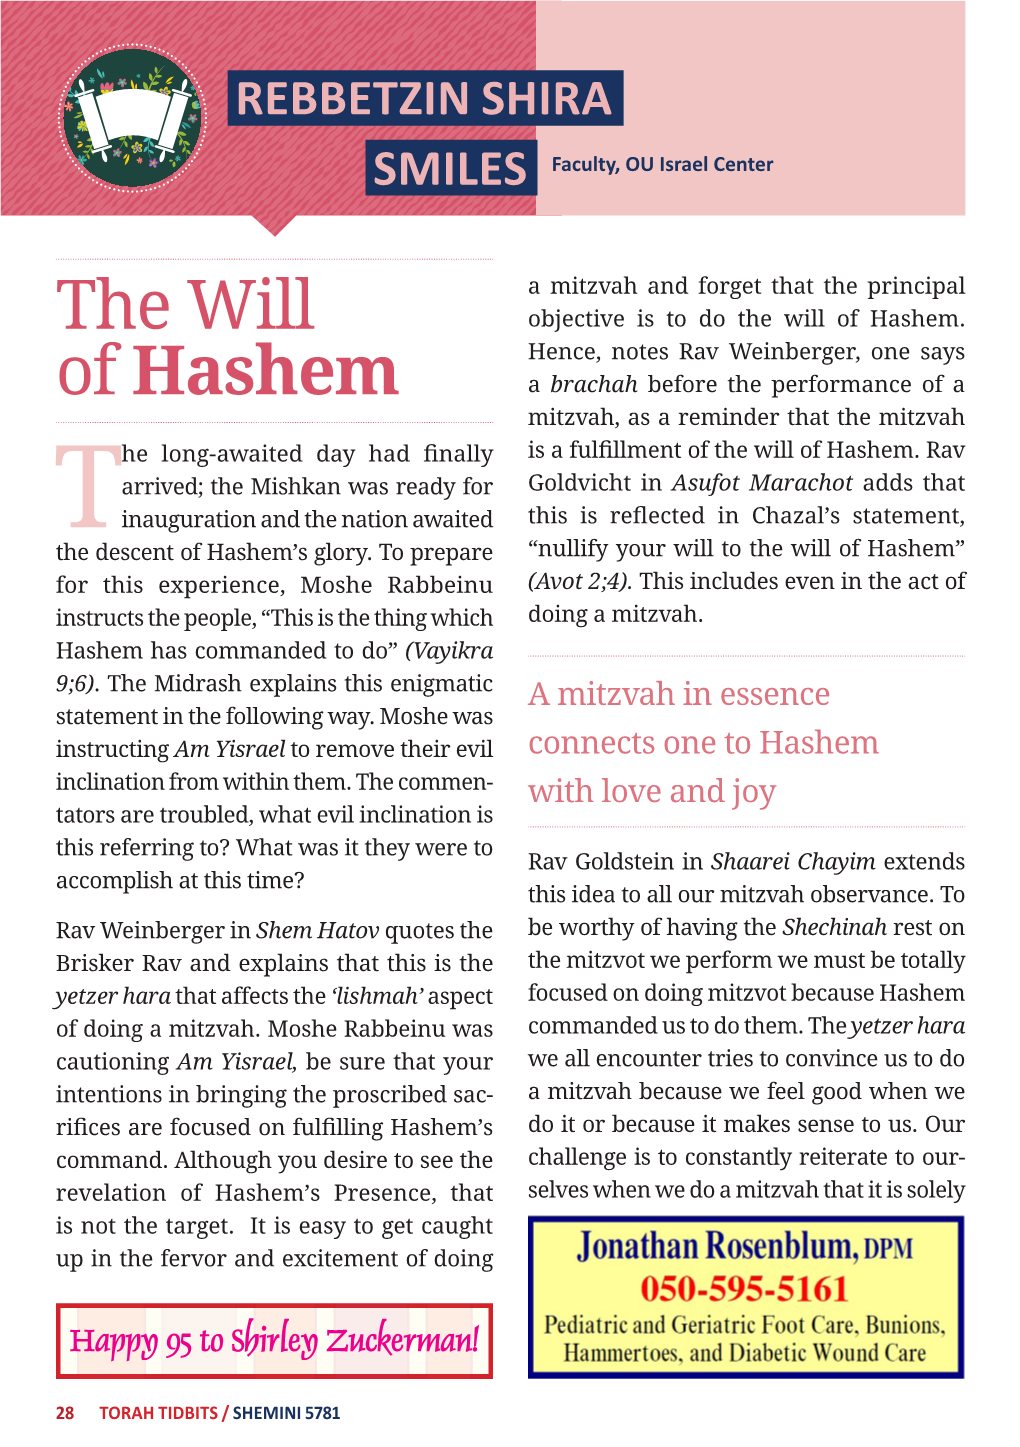 The Will of Hashem